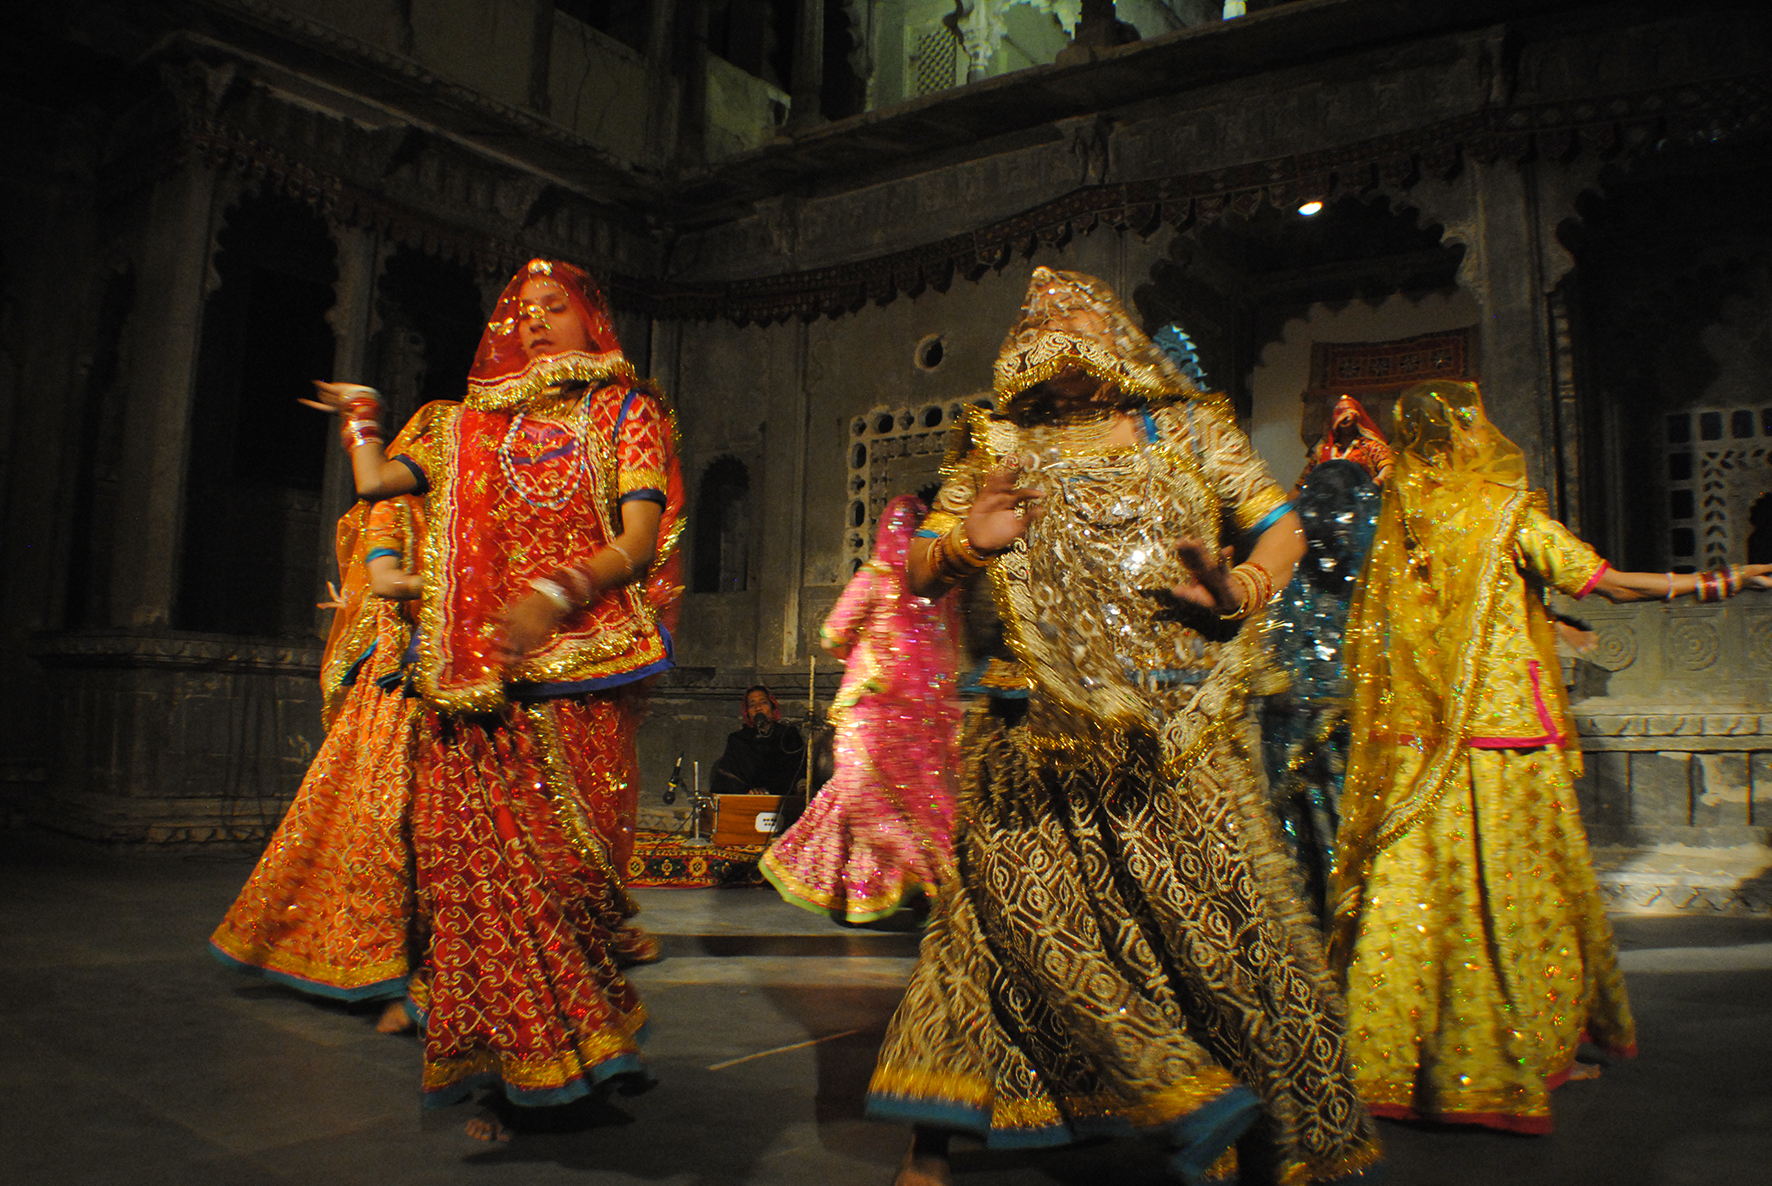 Rajasthani folk dancers move in and out a wide circle while moving gracefully to the rhythms of the traditional Ghoomar dance. Their outfit consists of an opaque or translucent veil and the Ghaghara dress.